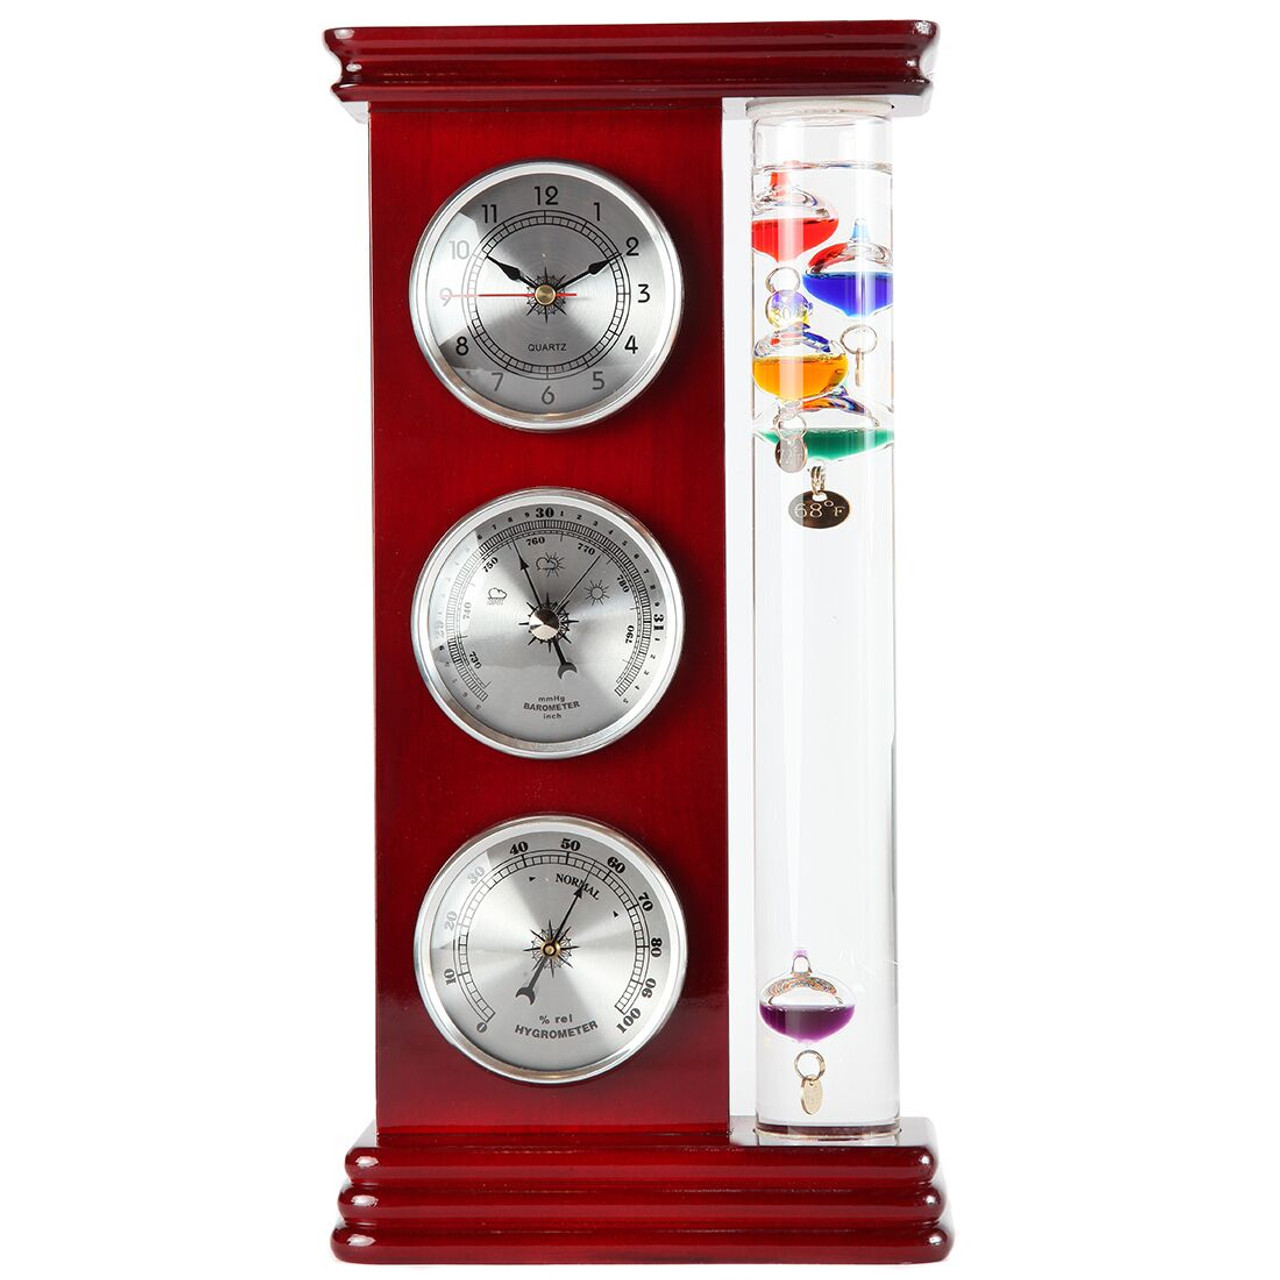 Lily's Home Analog Weather Station, with Galileo Thermometer, Glass  Barometer, and Analog Hygrometer, 5 Multi-Colored Spheres (10.5 in x 12 in)